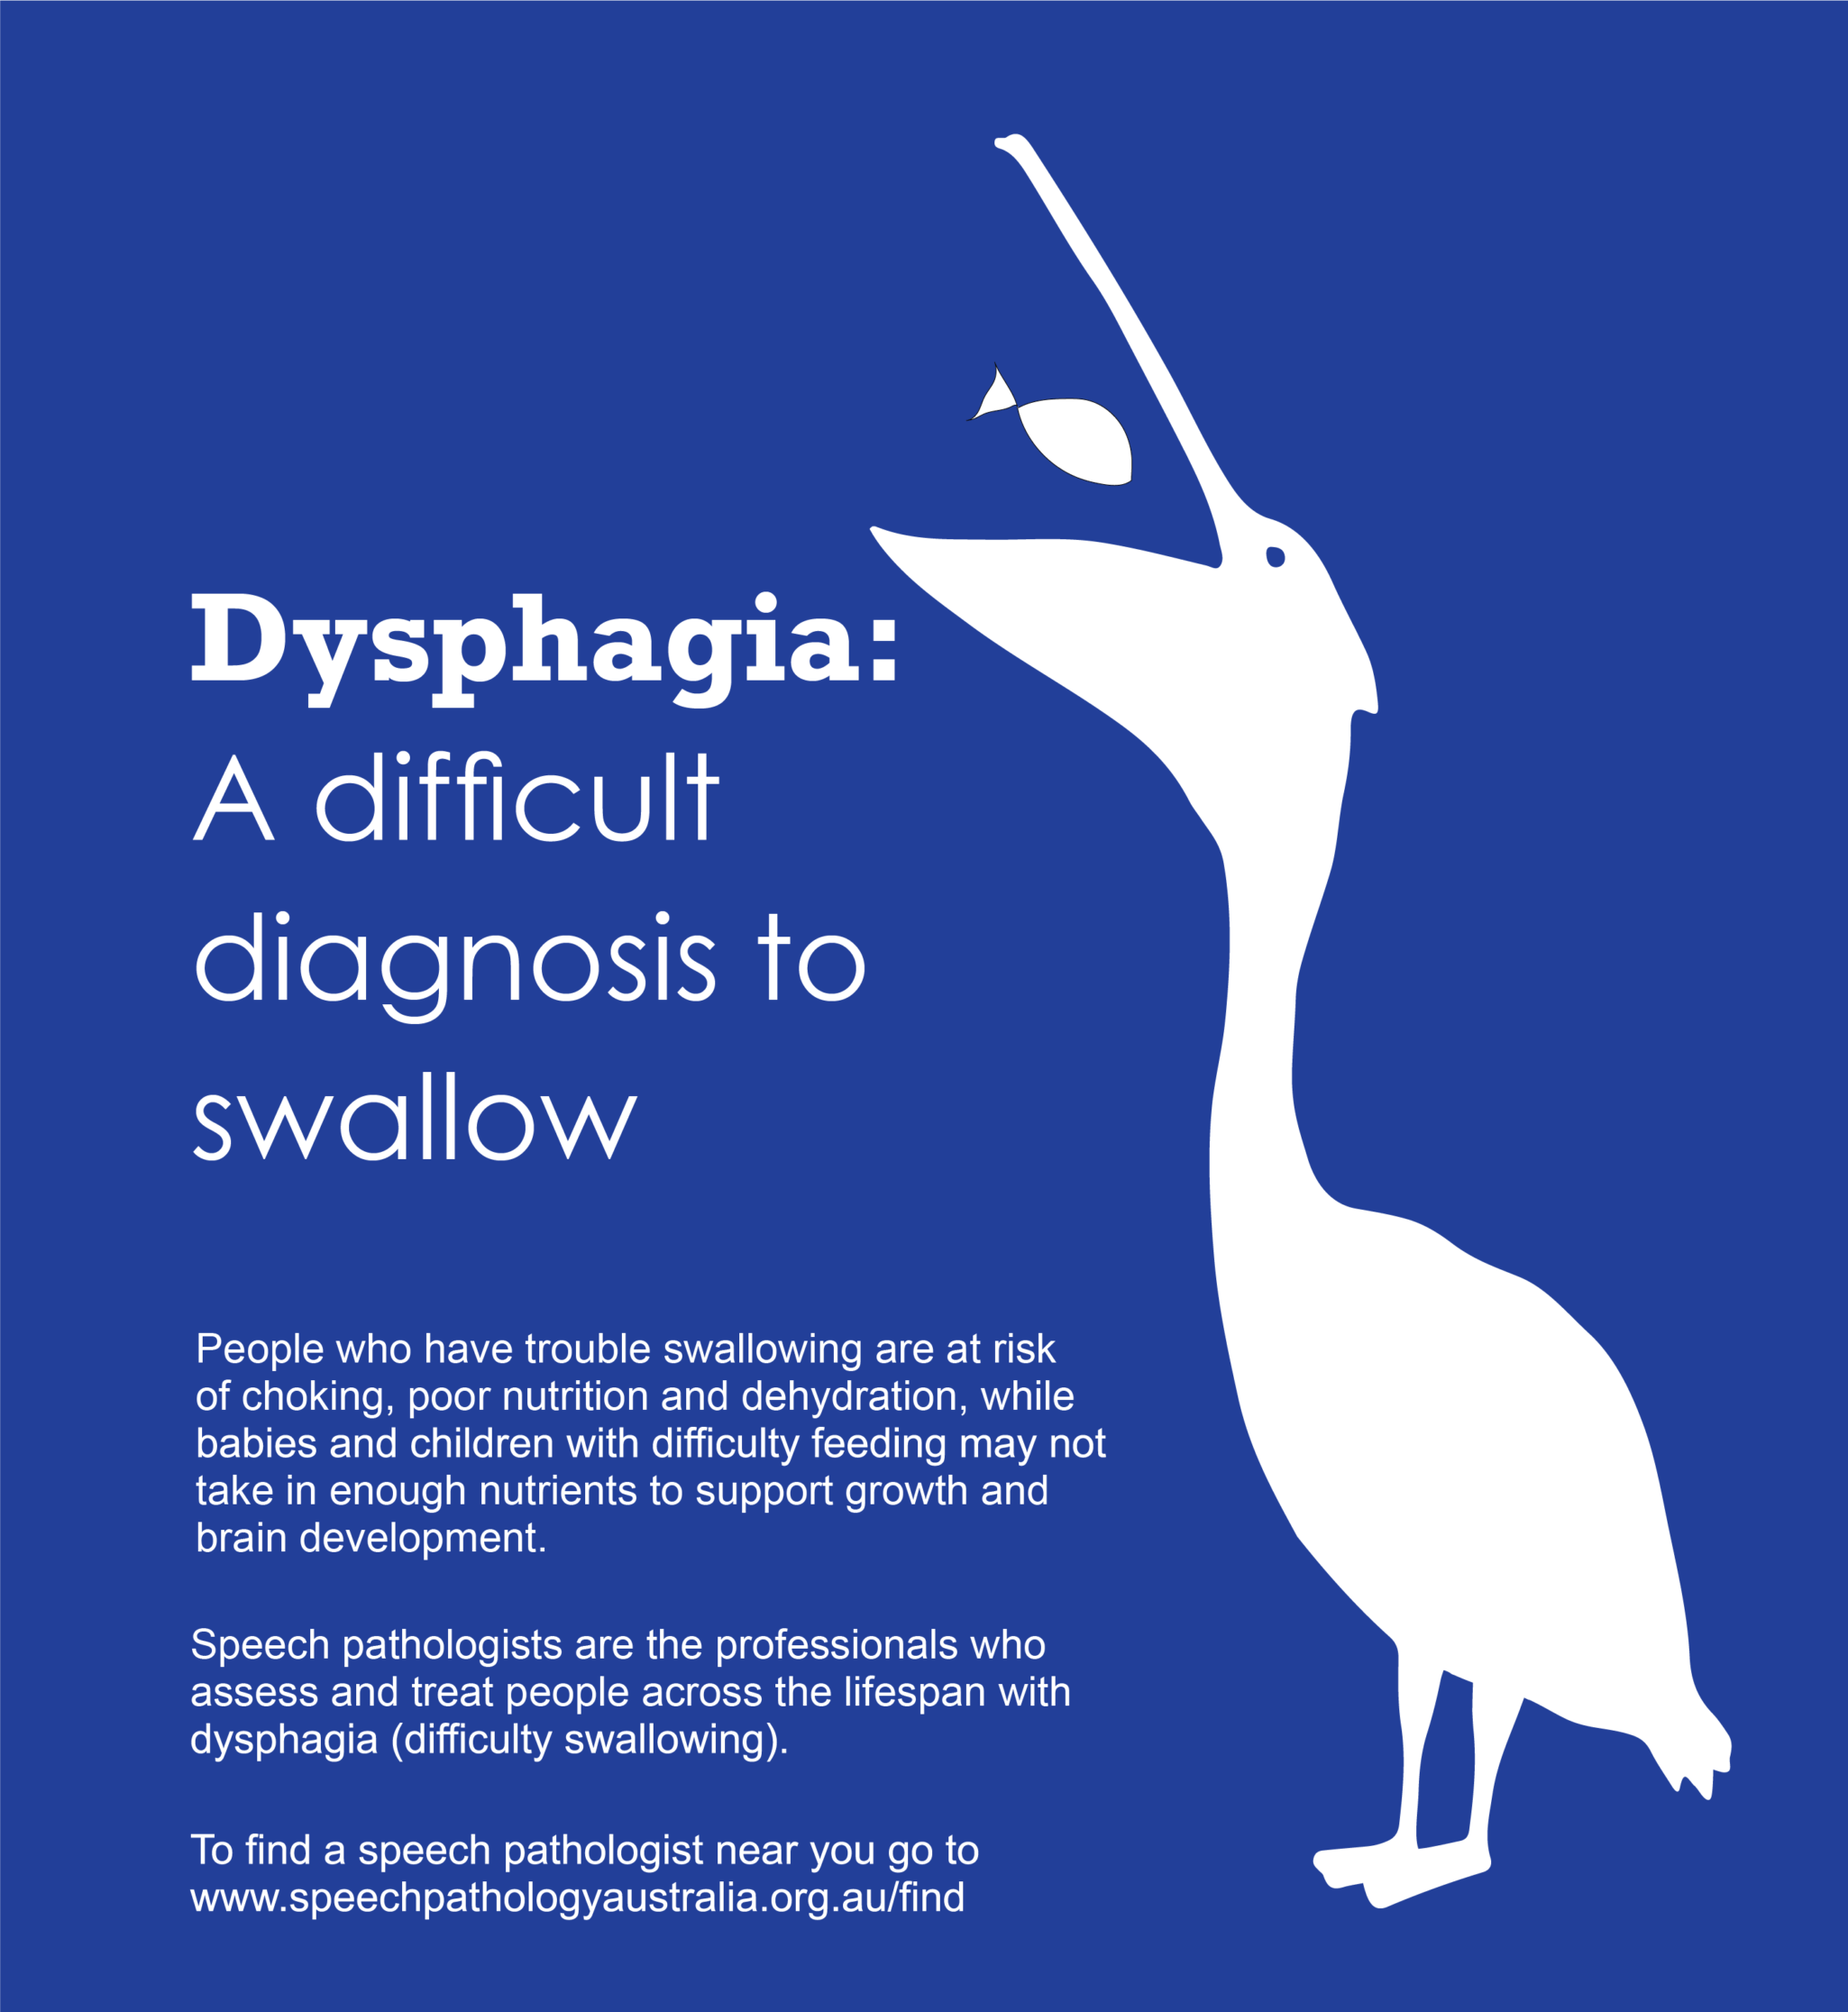 Dysphagia. A difficult diagnosis to swallow!